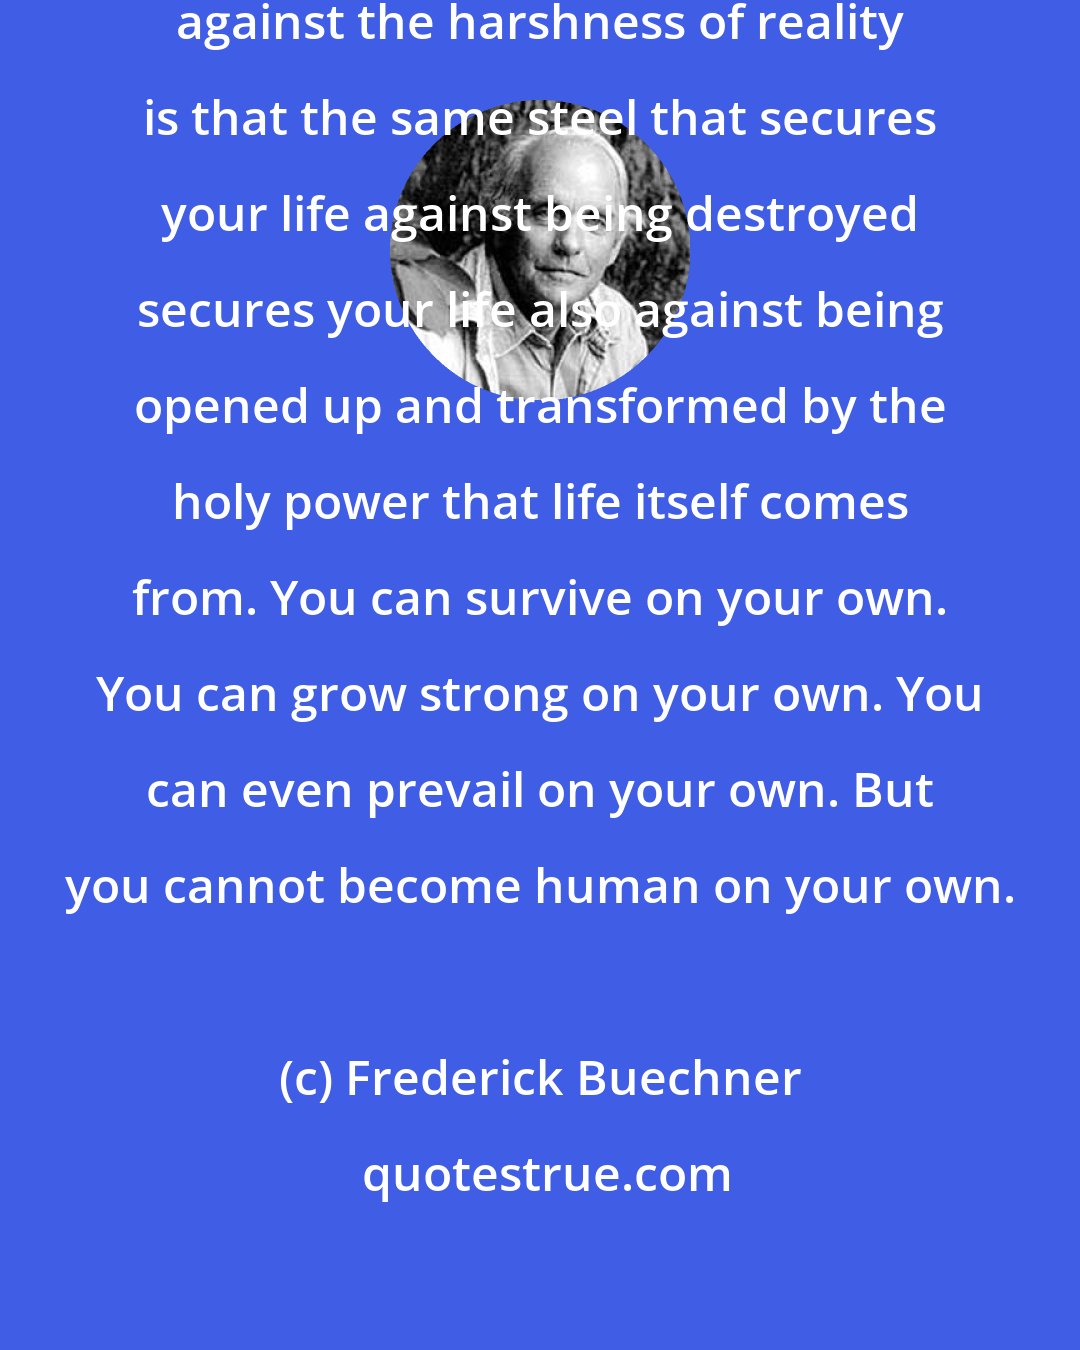 Frederick Buechner: The trouble with steeling yourself against the harshness of reality is that the same steel that secures your life against being destroyed secures your life also against being opened up and transformed by the holy power that life itself comes from. You can survive on your own. You can grow strong on your own. You can even prevail on your own. But you cannot become human on your own.